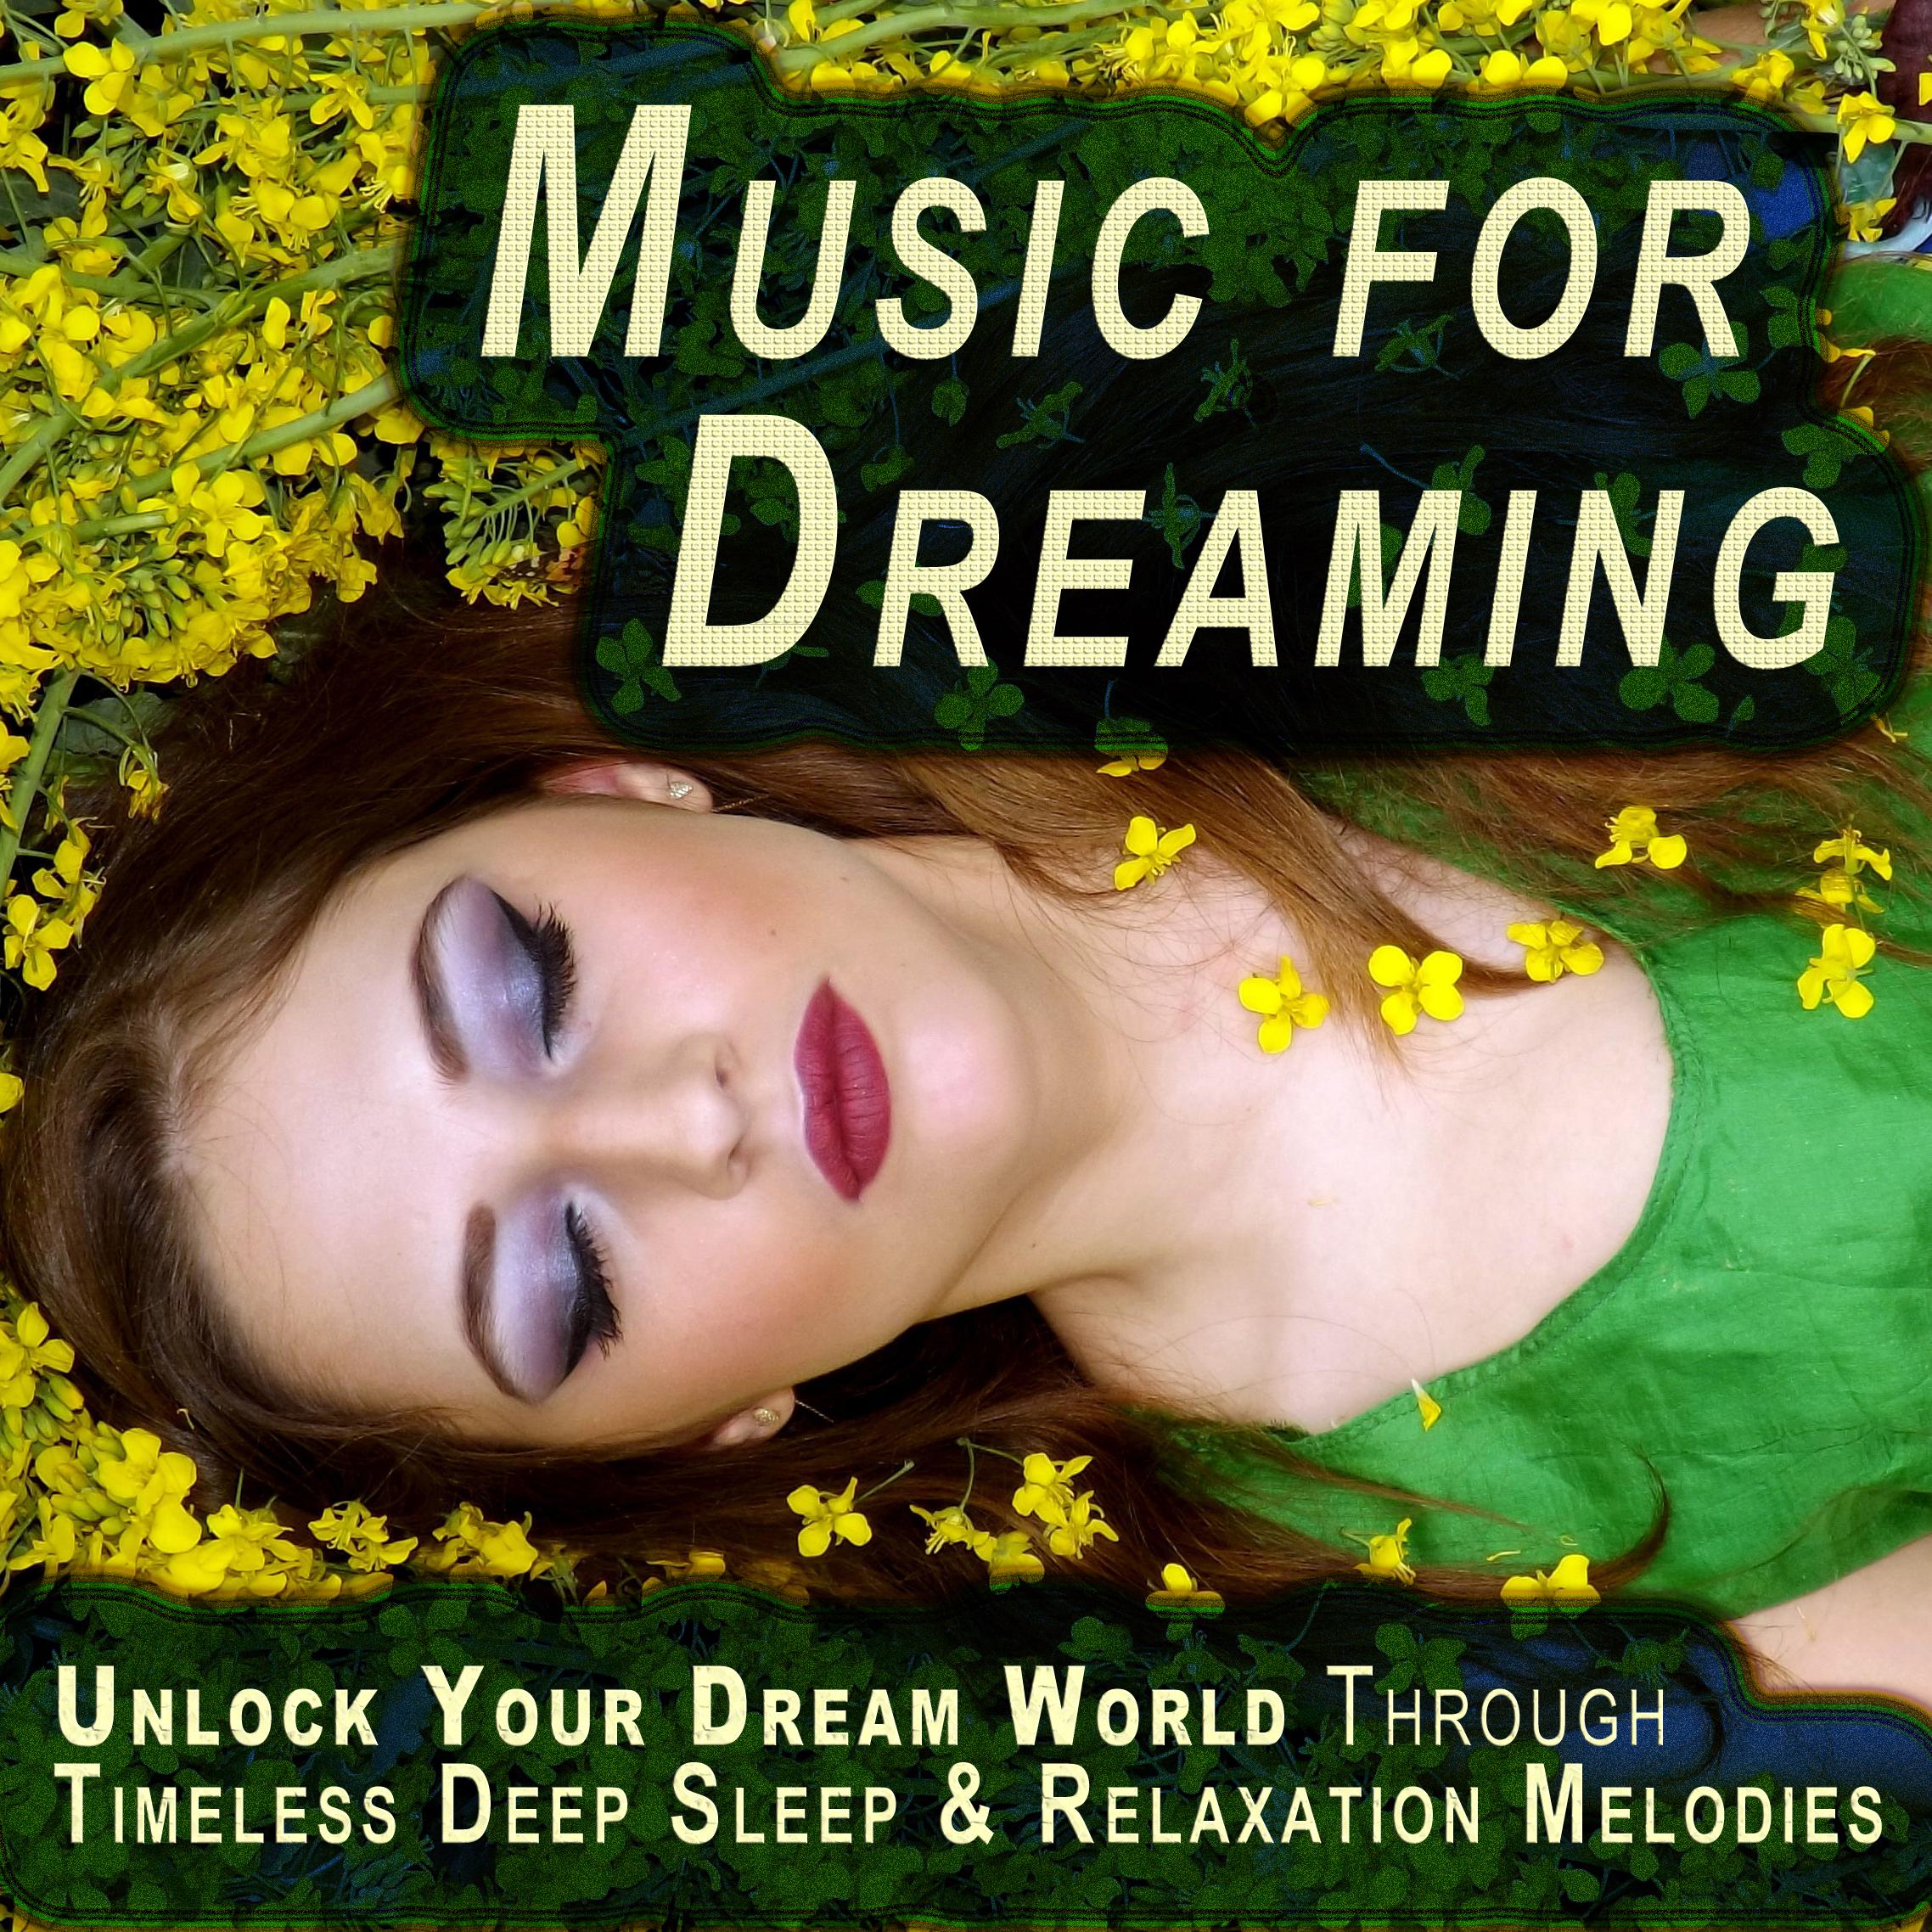 Music for Dreaming - Unlock Your Dream World Through Timeless Deep Sleep & Relaxation Melodies, Proven to Help You Fall Asleep and Improve Your Health Through Better Sleeping Habits